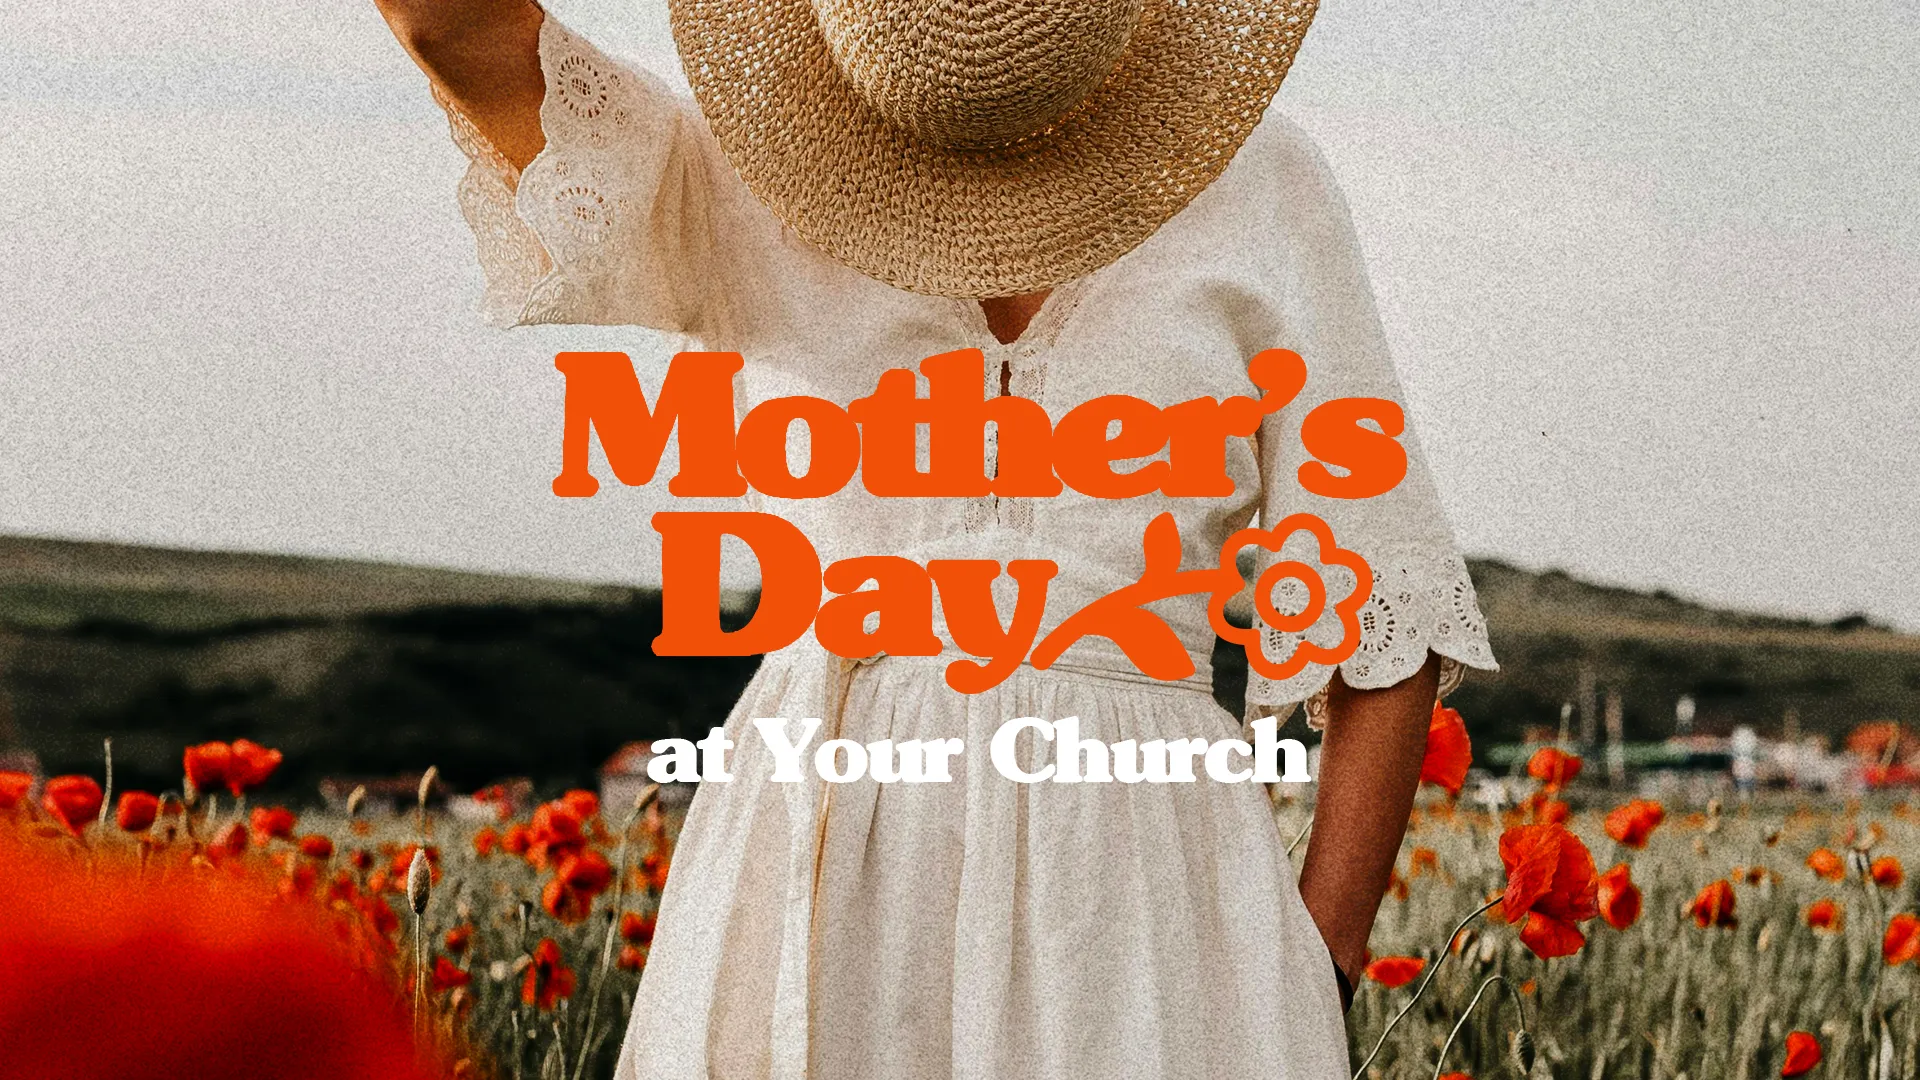 Celebrate Mother'S Day With A Vibrant Touch! This Church Media Graphic Features Warm, Rustic Imagery That'S Perfect For Honoring Mothers In Your Congregation. It'S A Fresh Take On Tradition, Sure To Bring A Welcoming And Festive Atmosphere To Your Services.